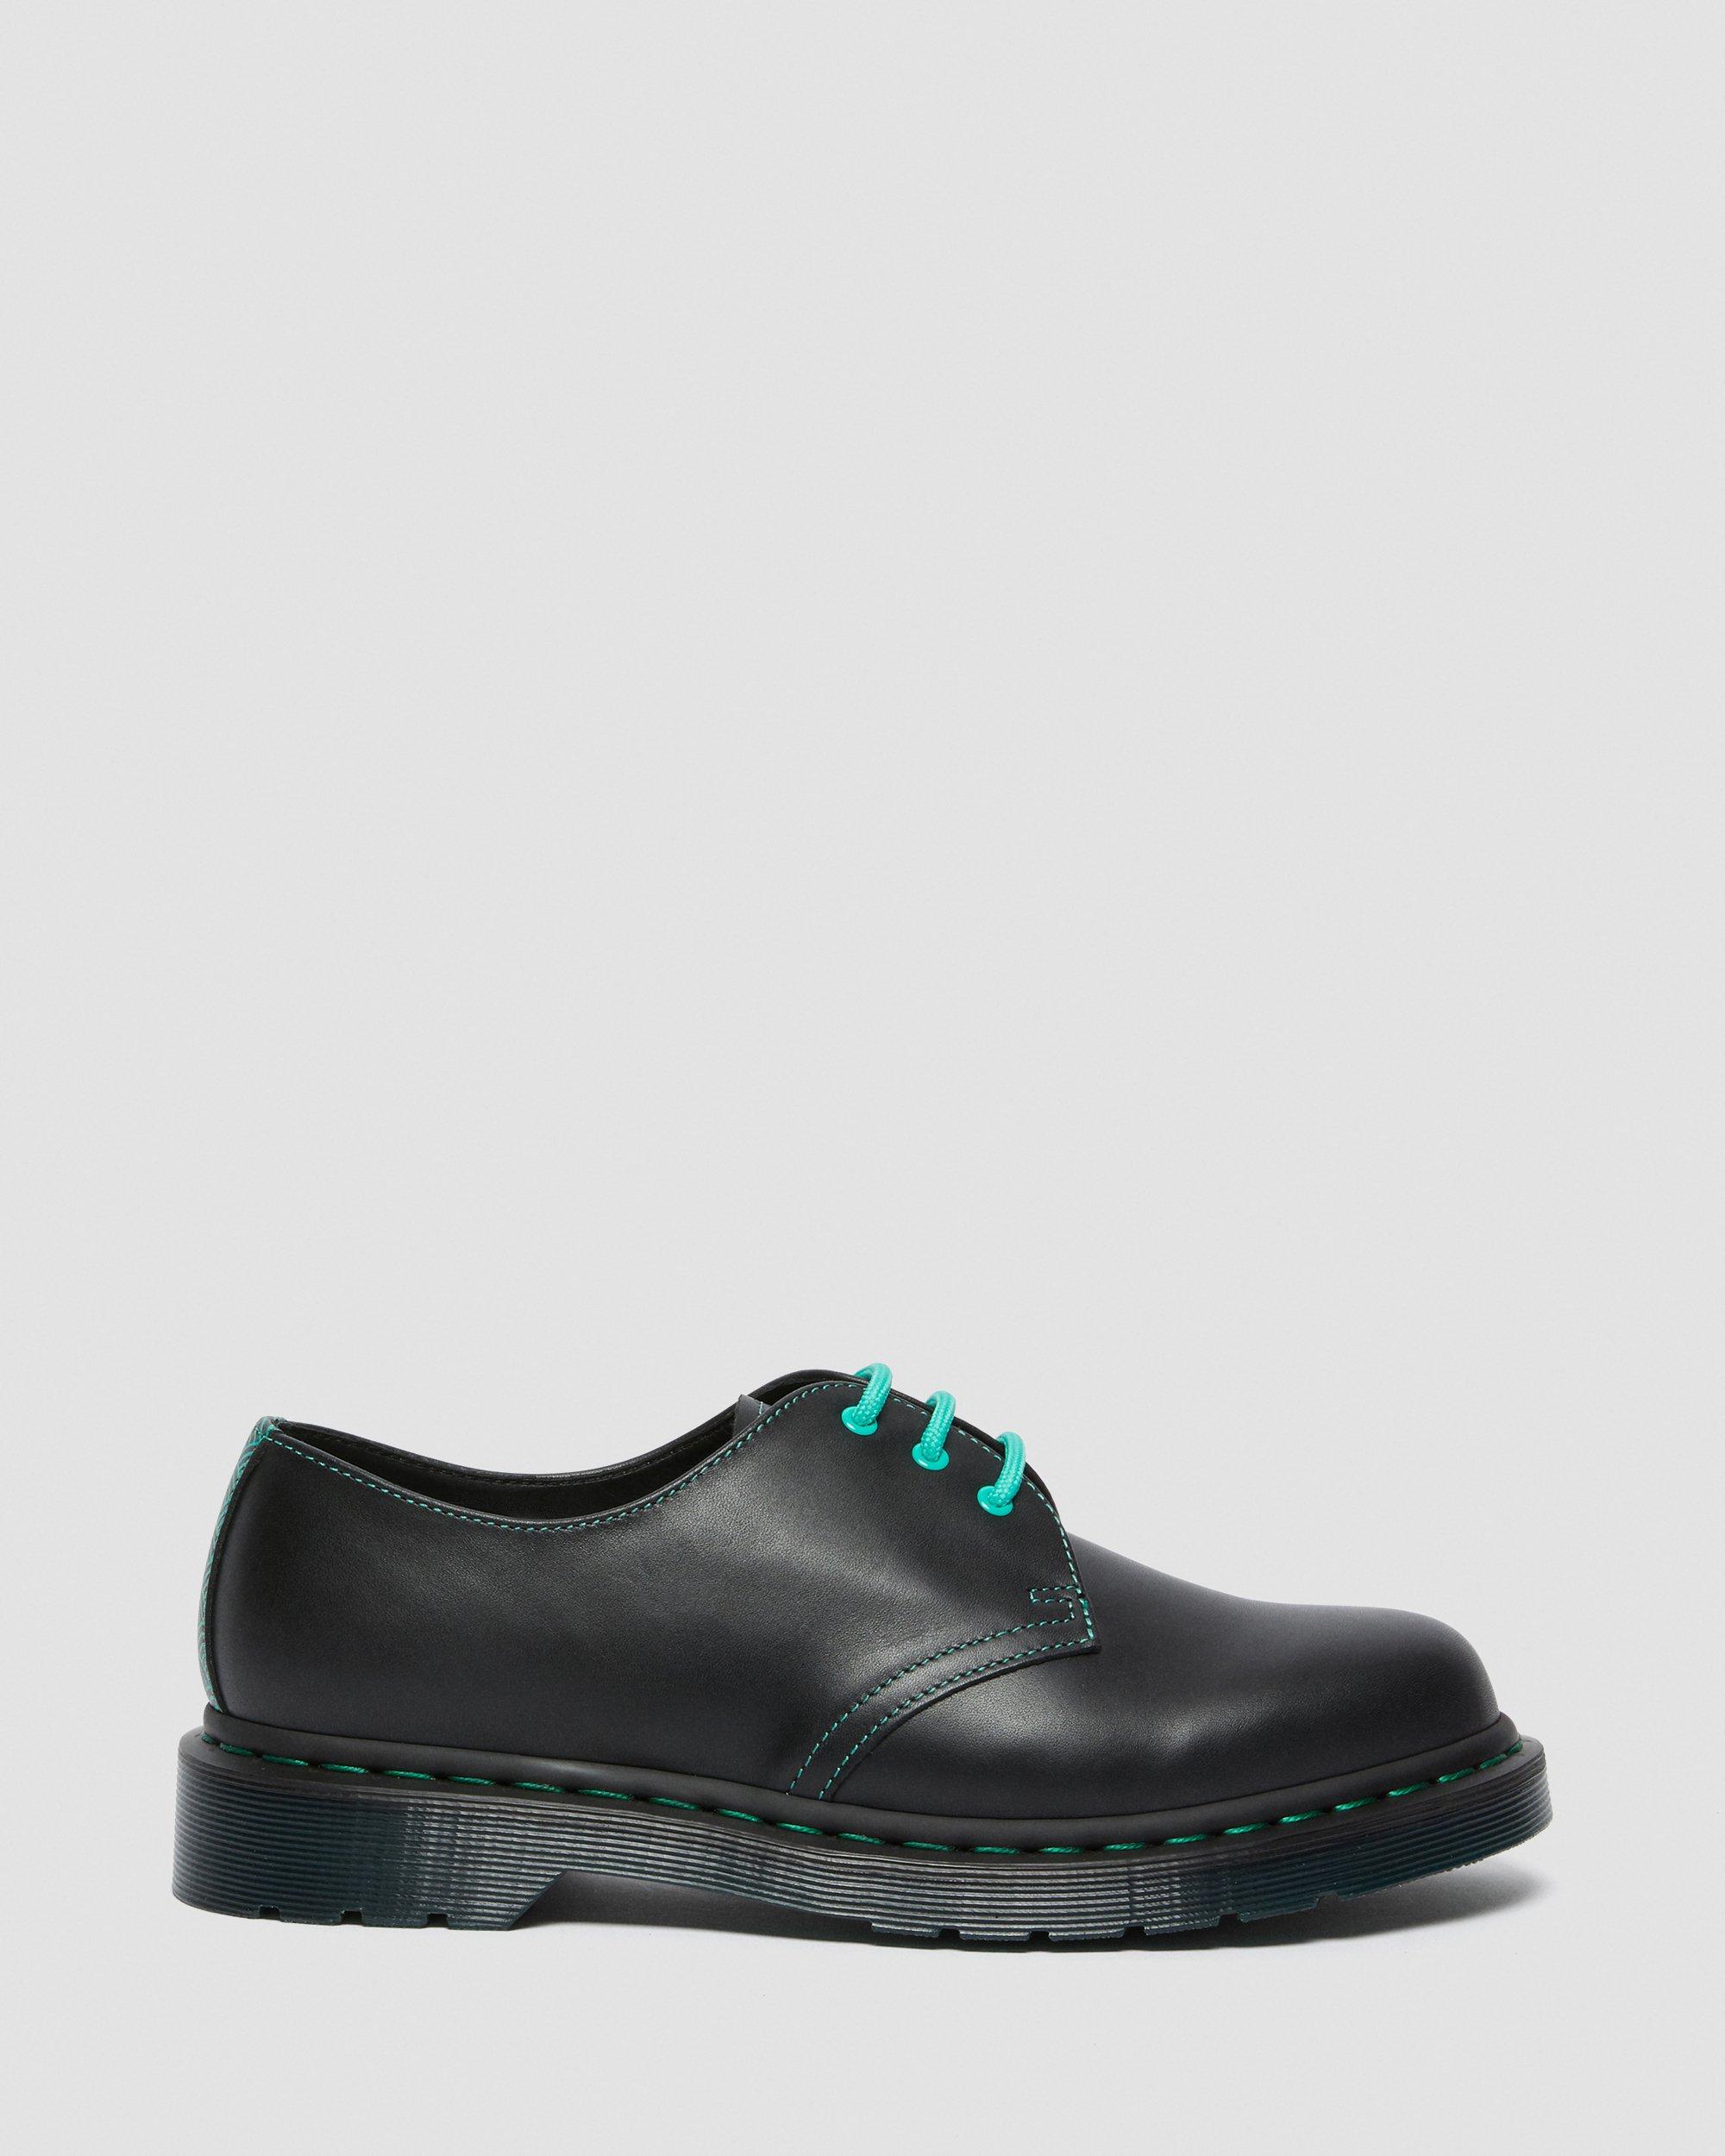 1461 Chinese New Year Leather Oxford Shoes | Dr. Martens